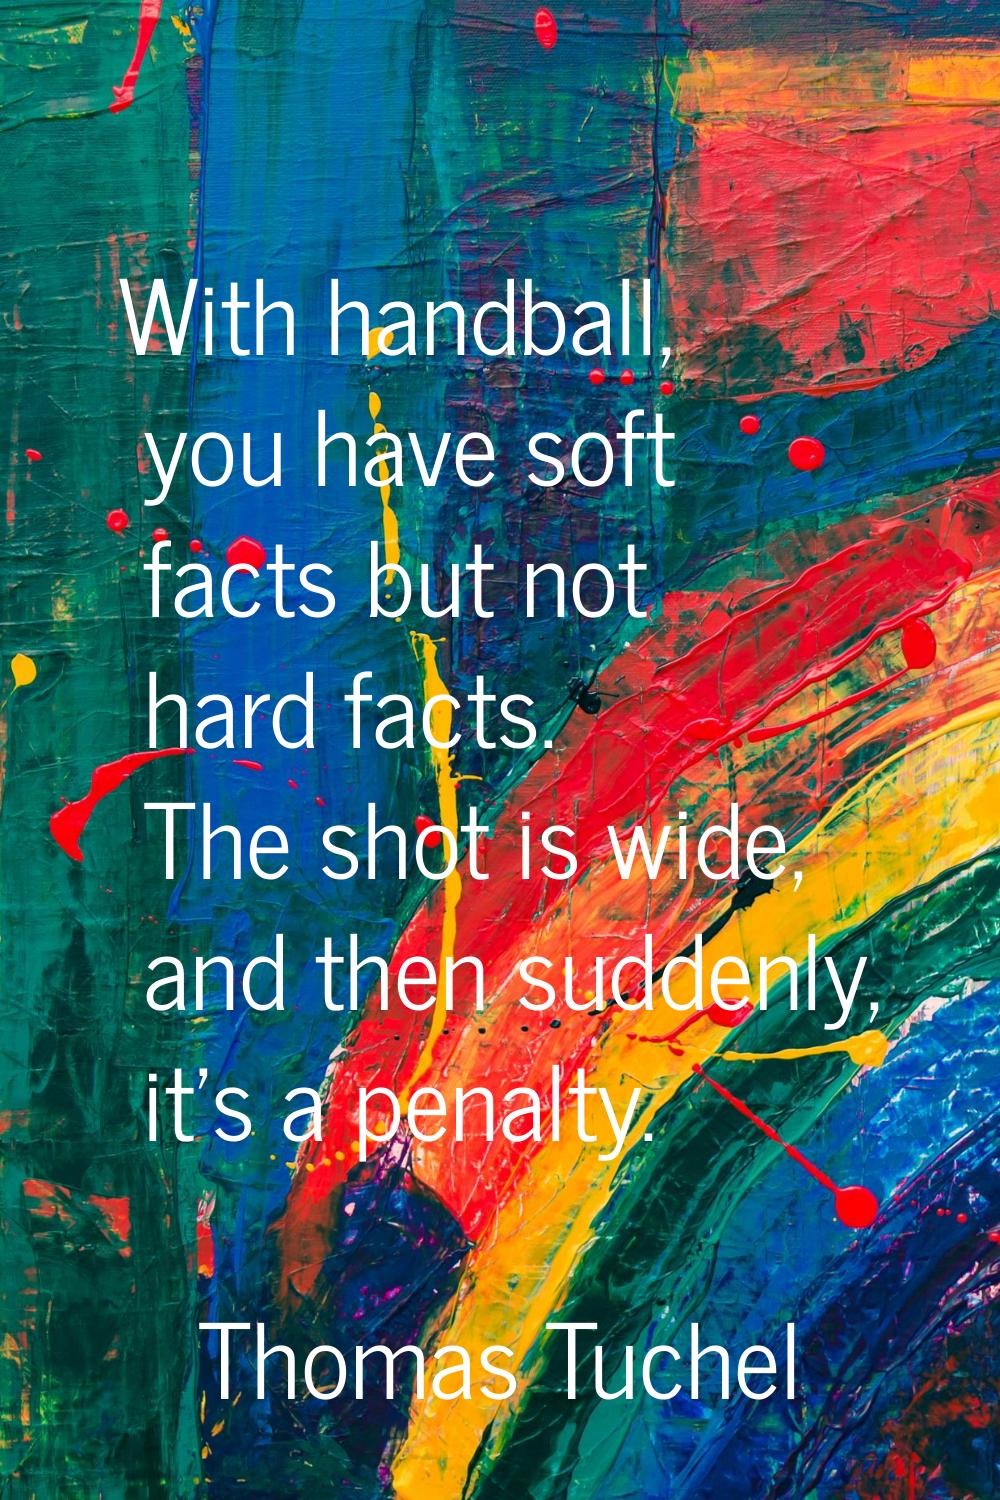 With handball, you have soft facts but not hard facts. The shot is wide, and then suddenly, it's a 